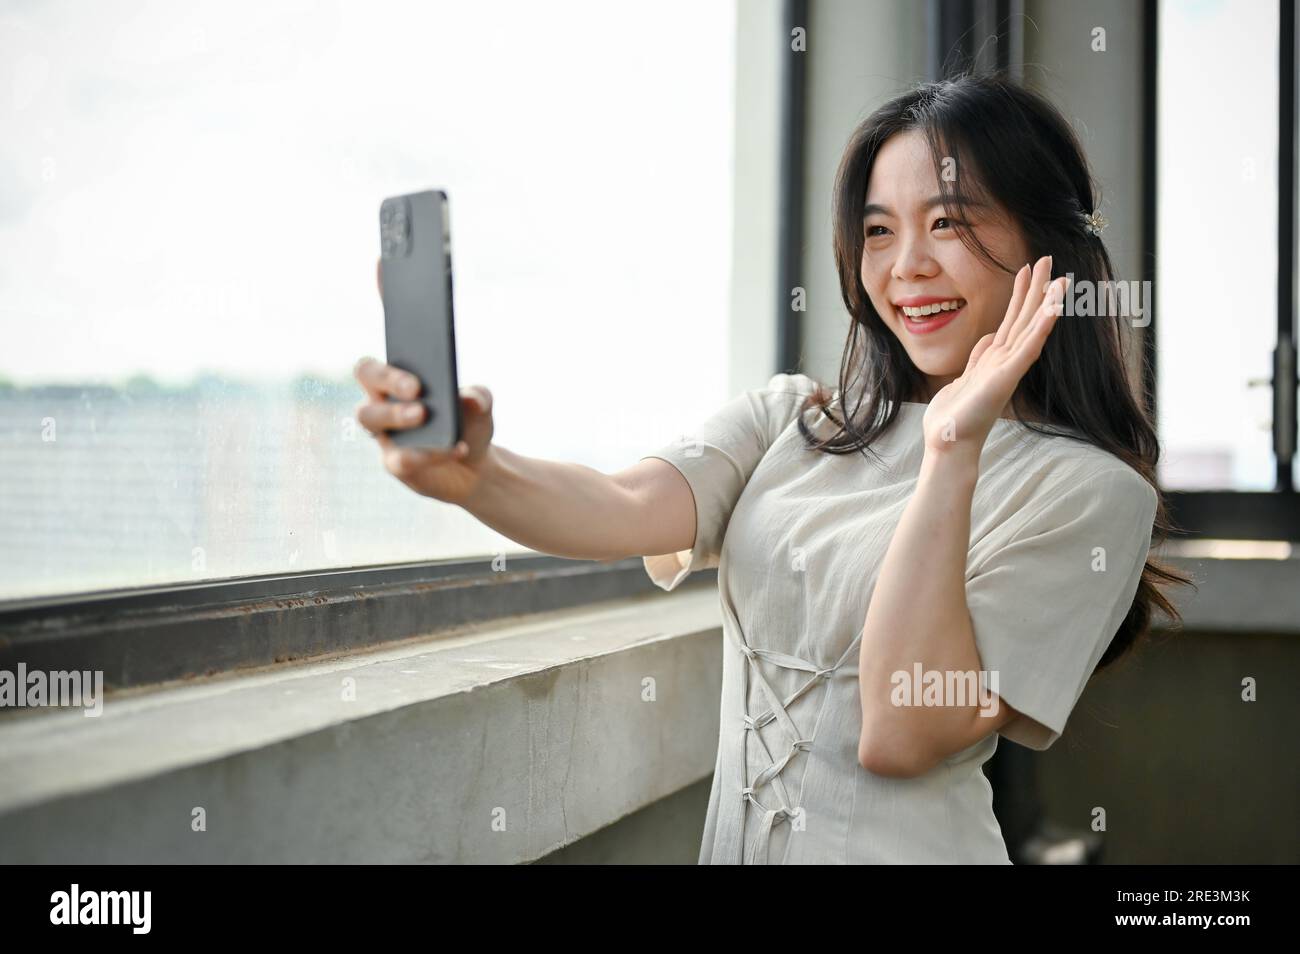 An attractive Asian woman in a beautiful dress is taking selfies with her smartphone while standing by the window in a building. Stock Photo